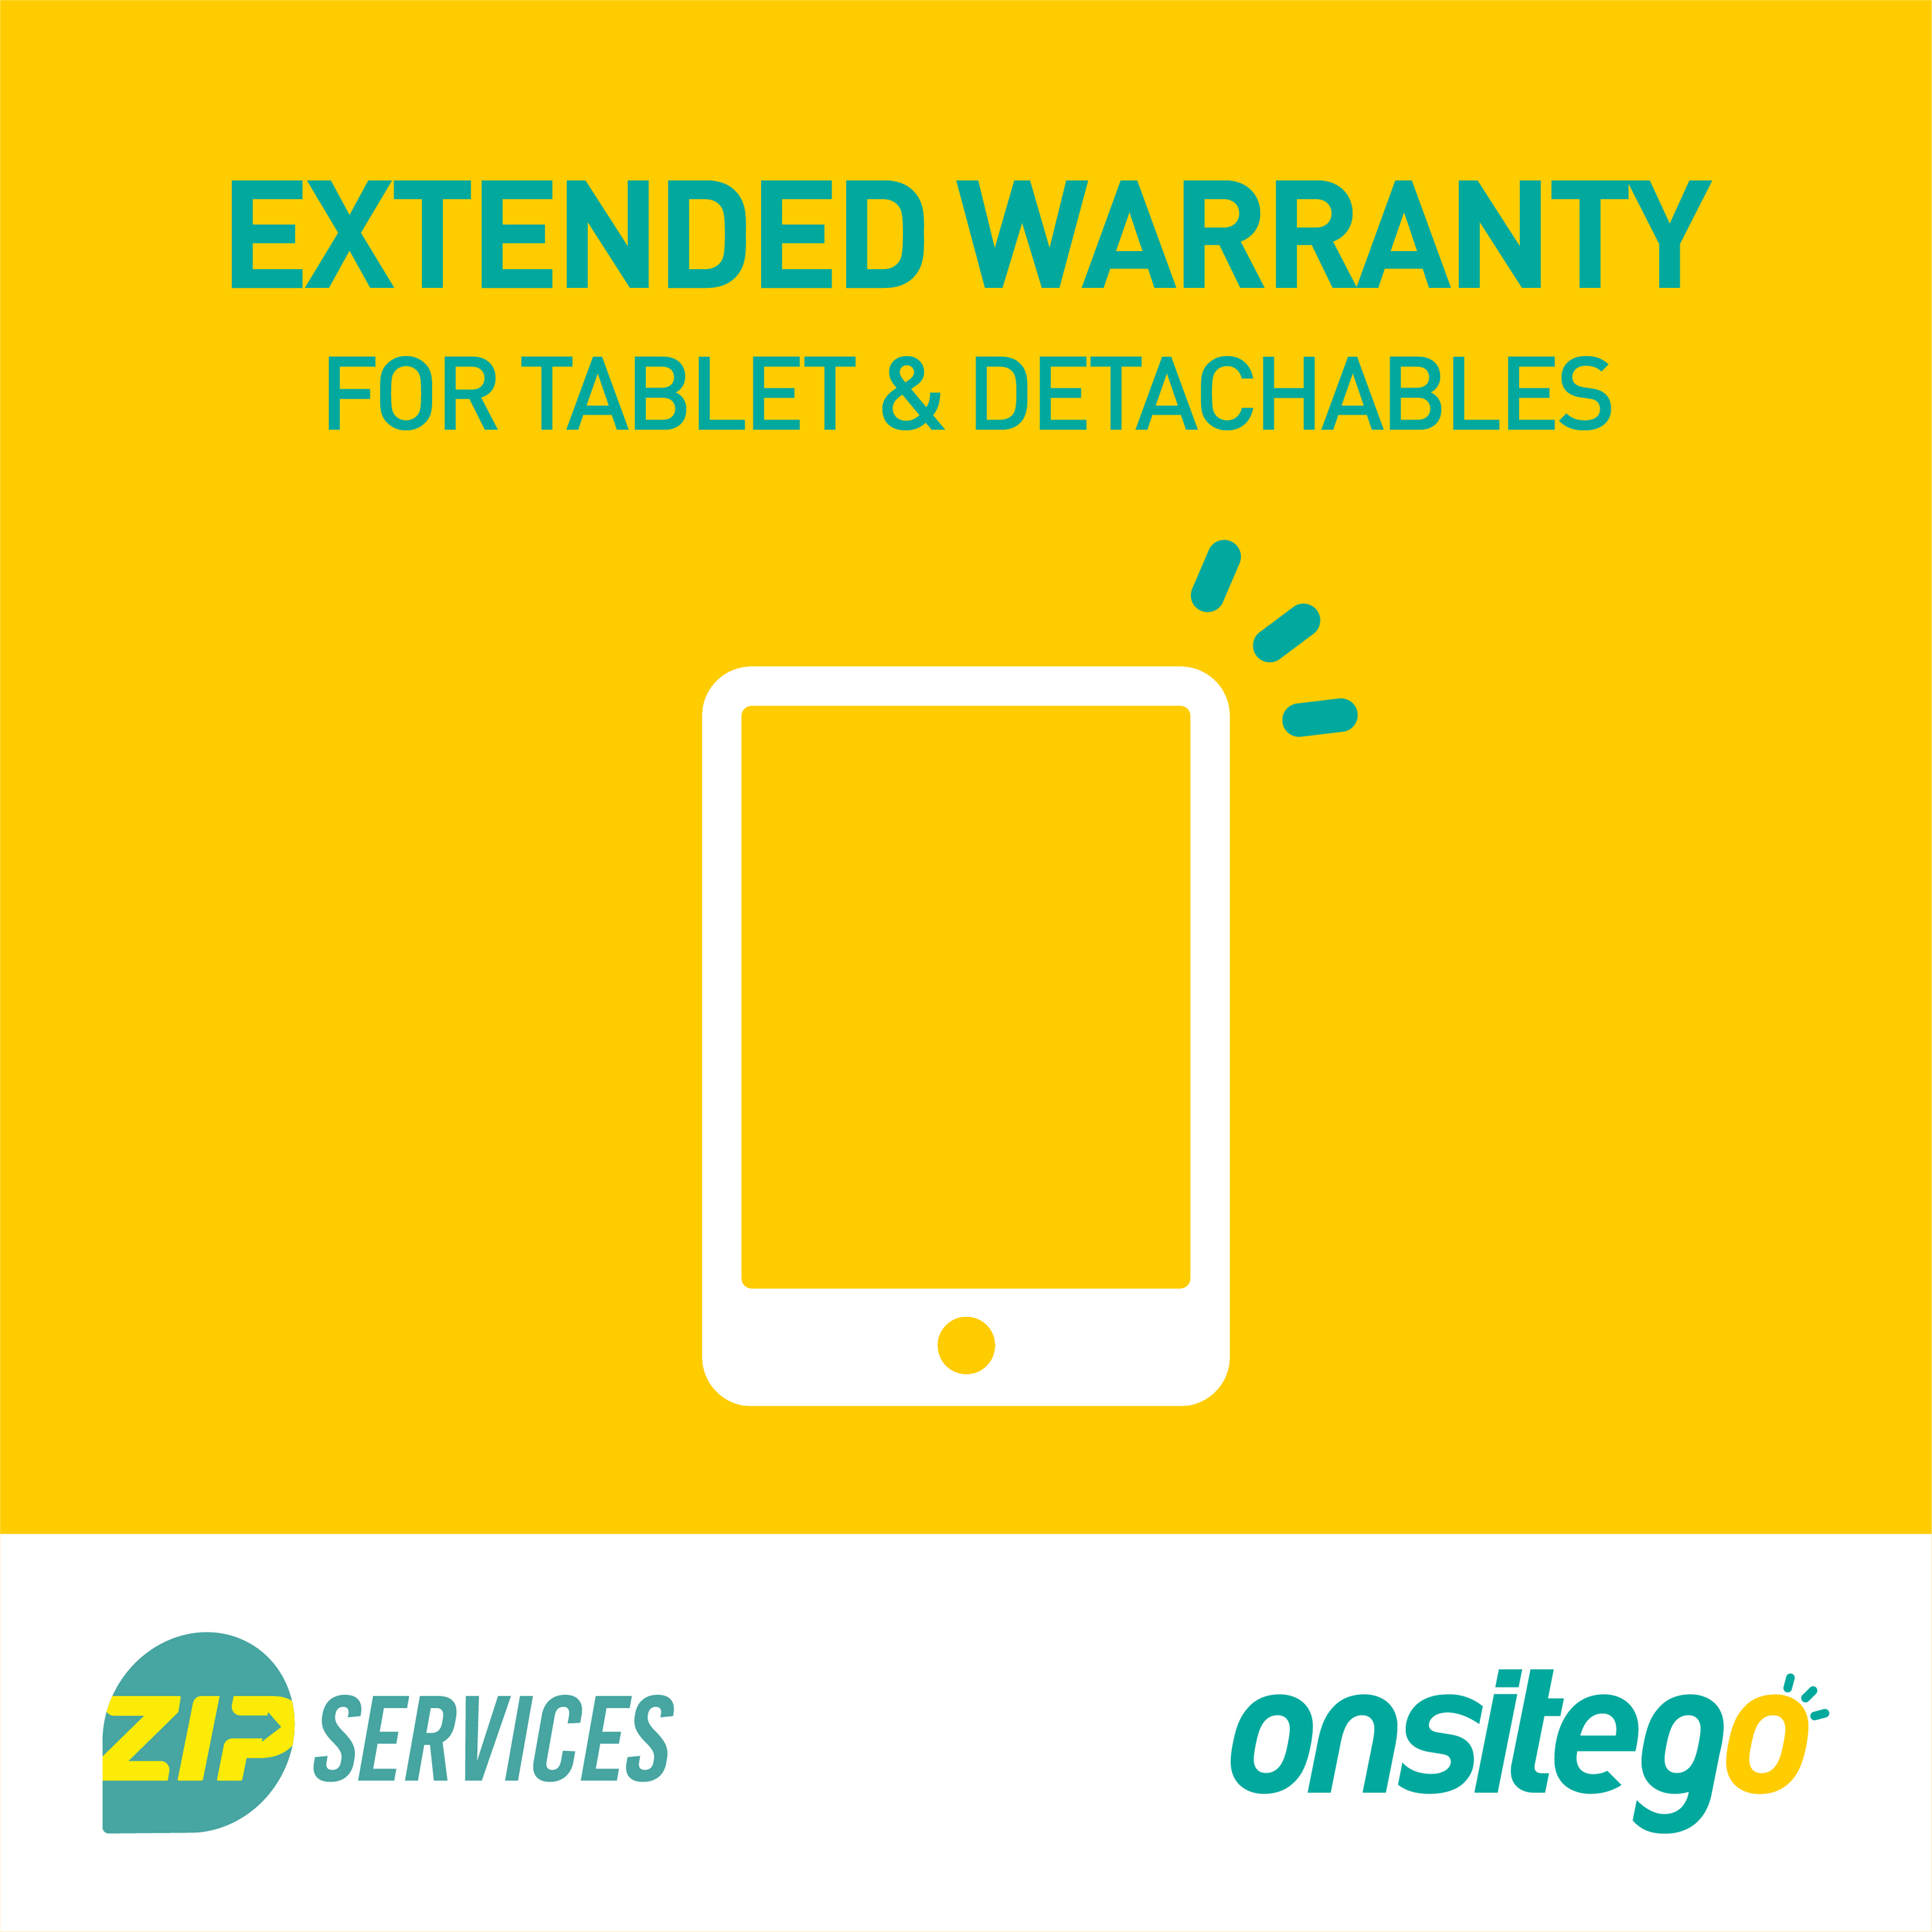 Onsitego 3 Months Extended Warranty for Tablets Rs.115001 - Rs.120000_1